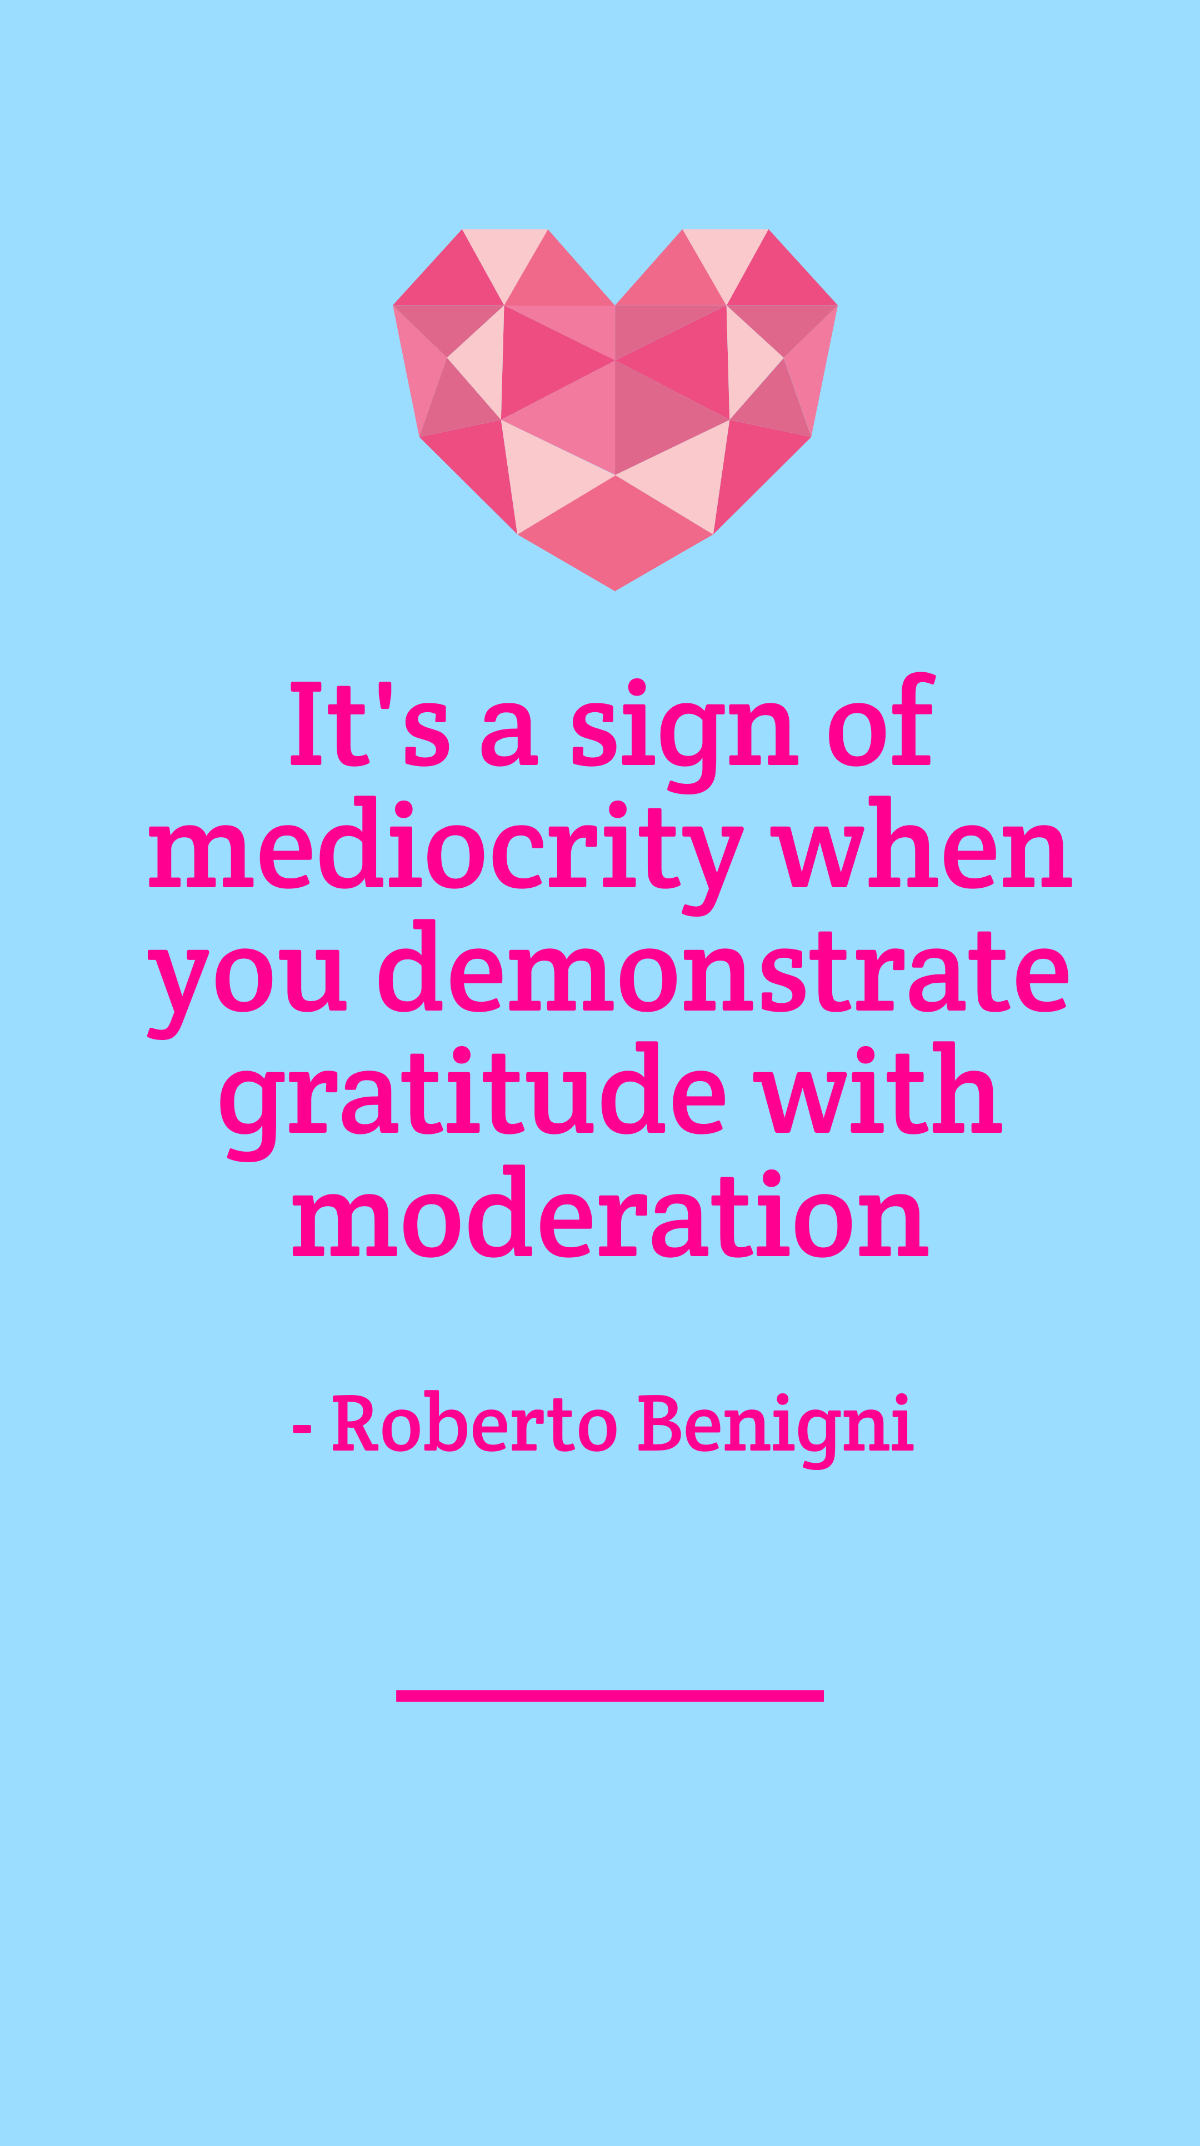 Free Roberto Benigni - It's a sign of mediocrity when you demonstrate gratitude with moderation Template